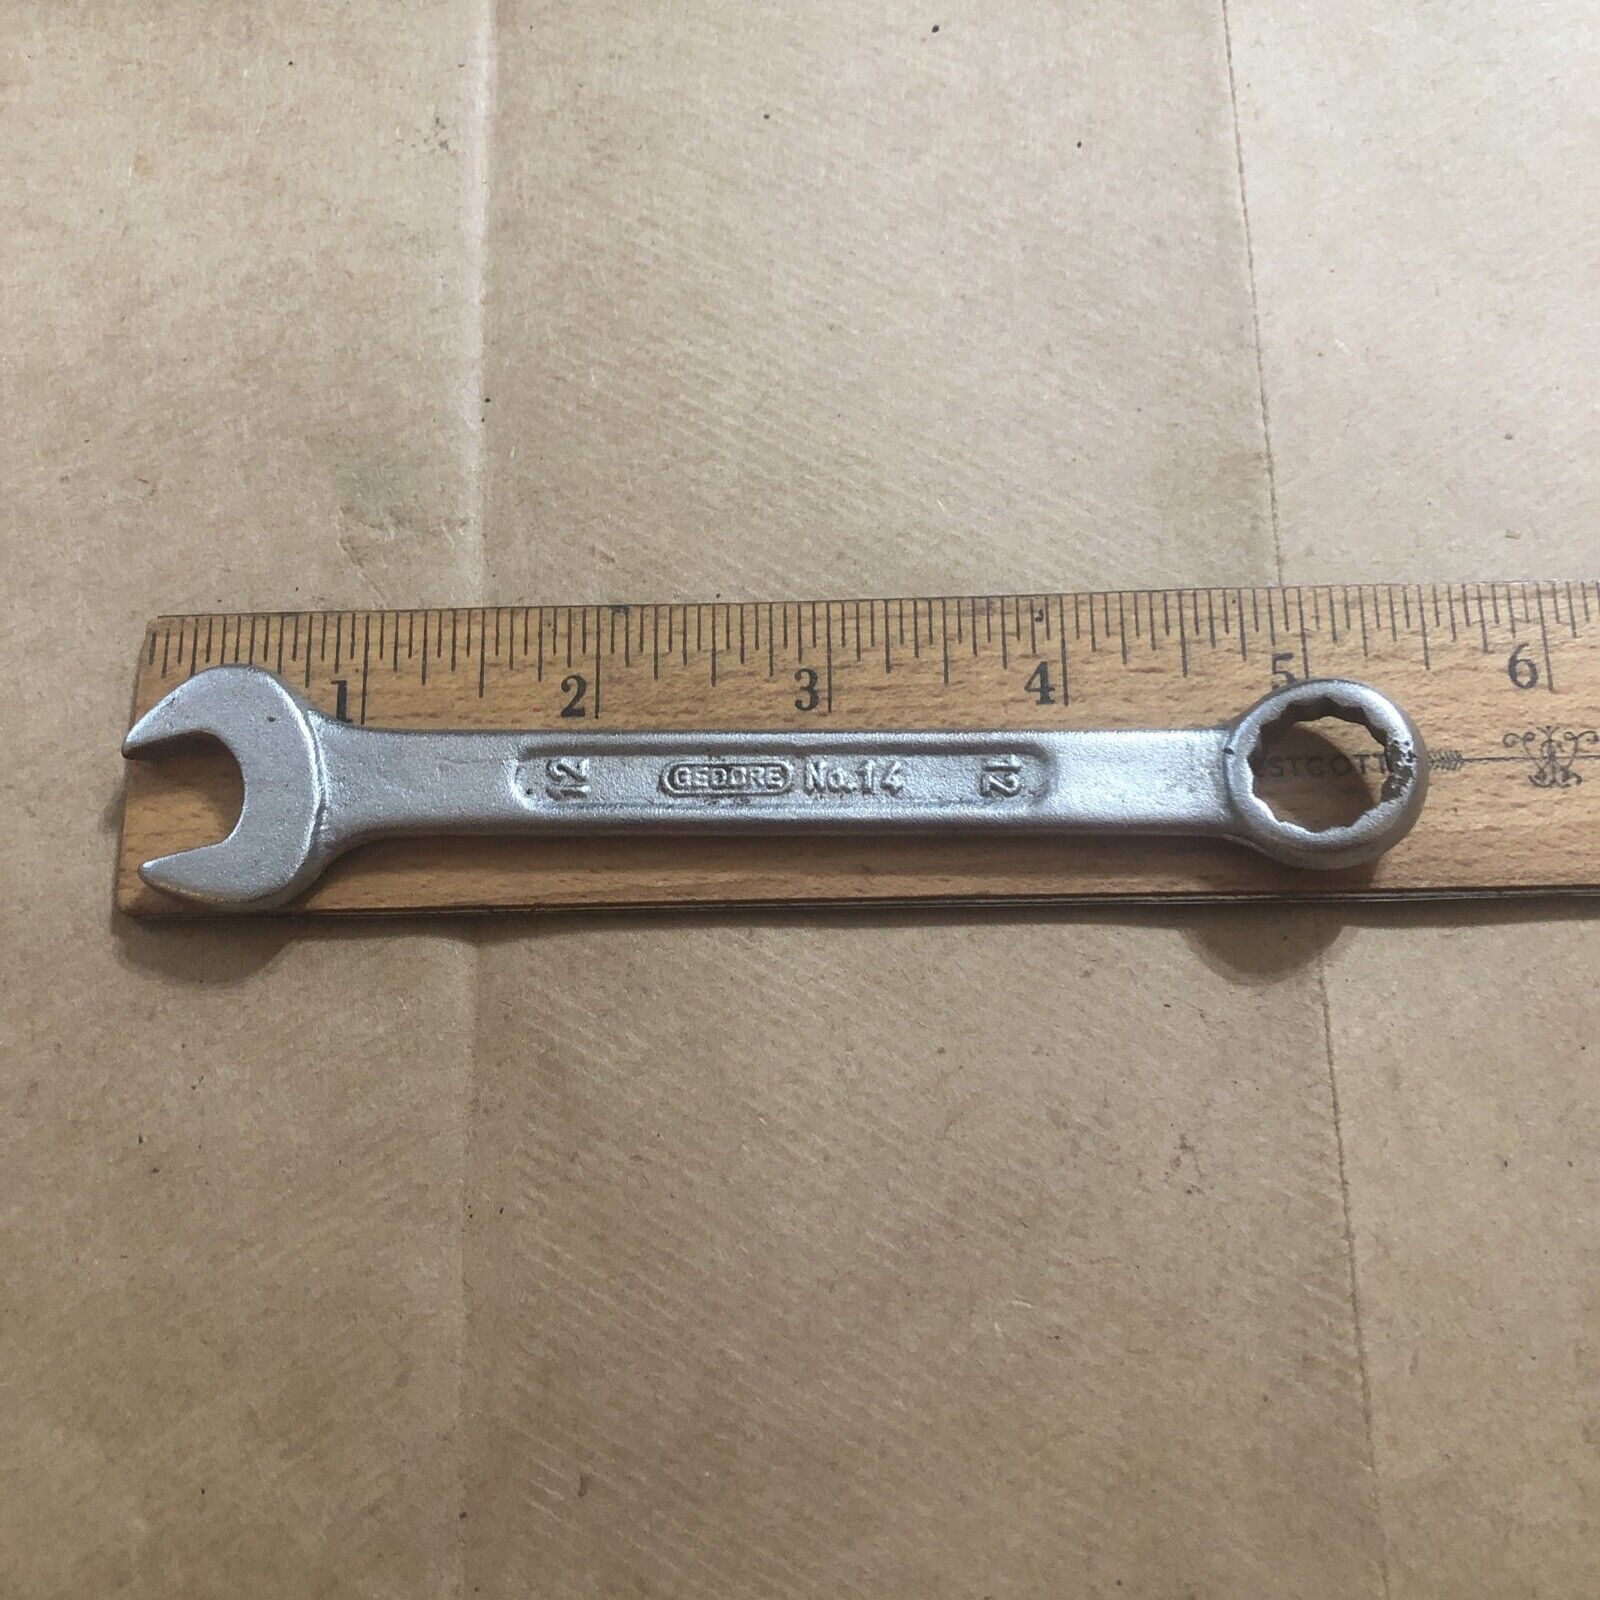 Gedore Combination Wrench 12mm, 12 mm.  No. 14, 2 D, Drop Forged, Made in India